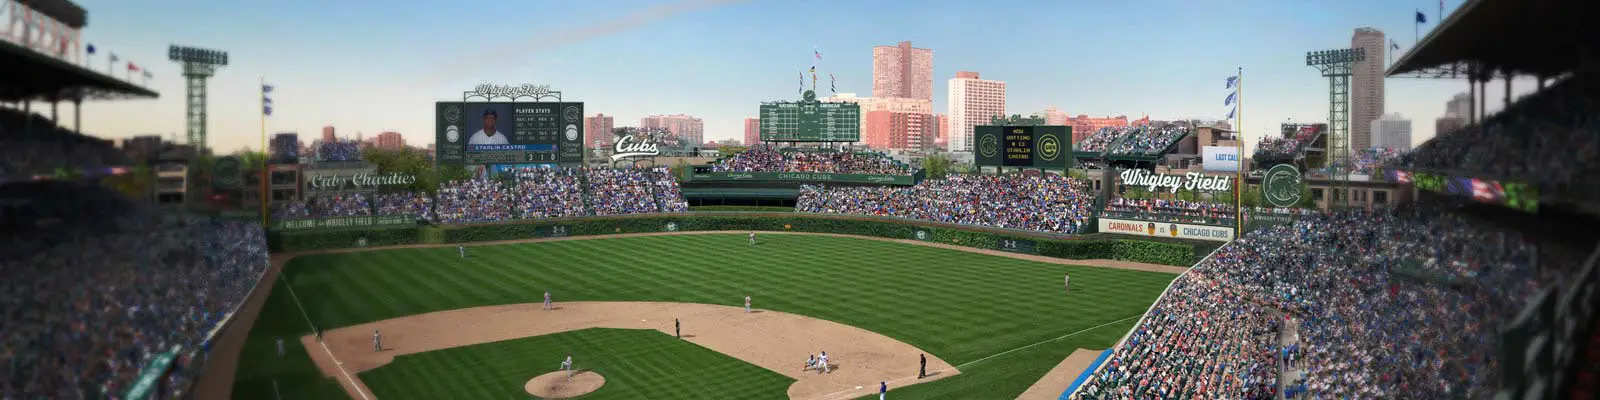 Cable for Wrigley Field